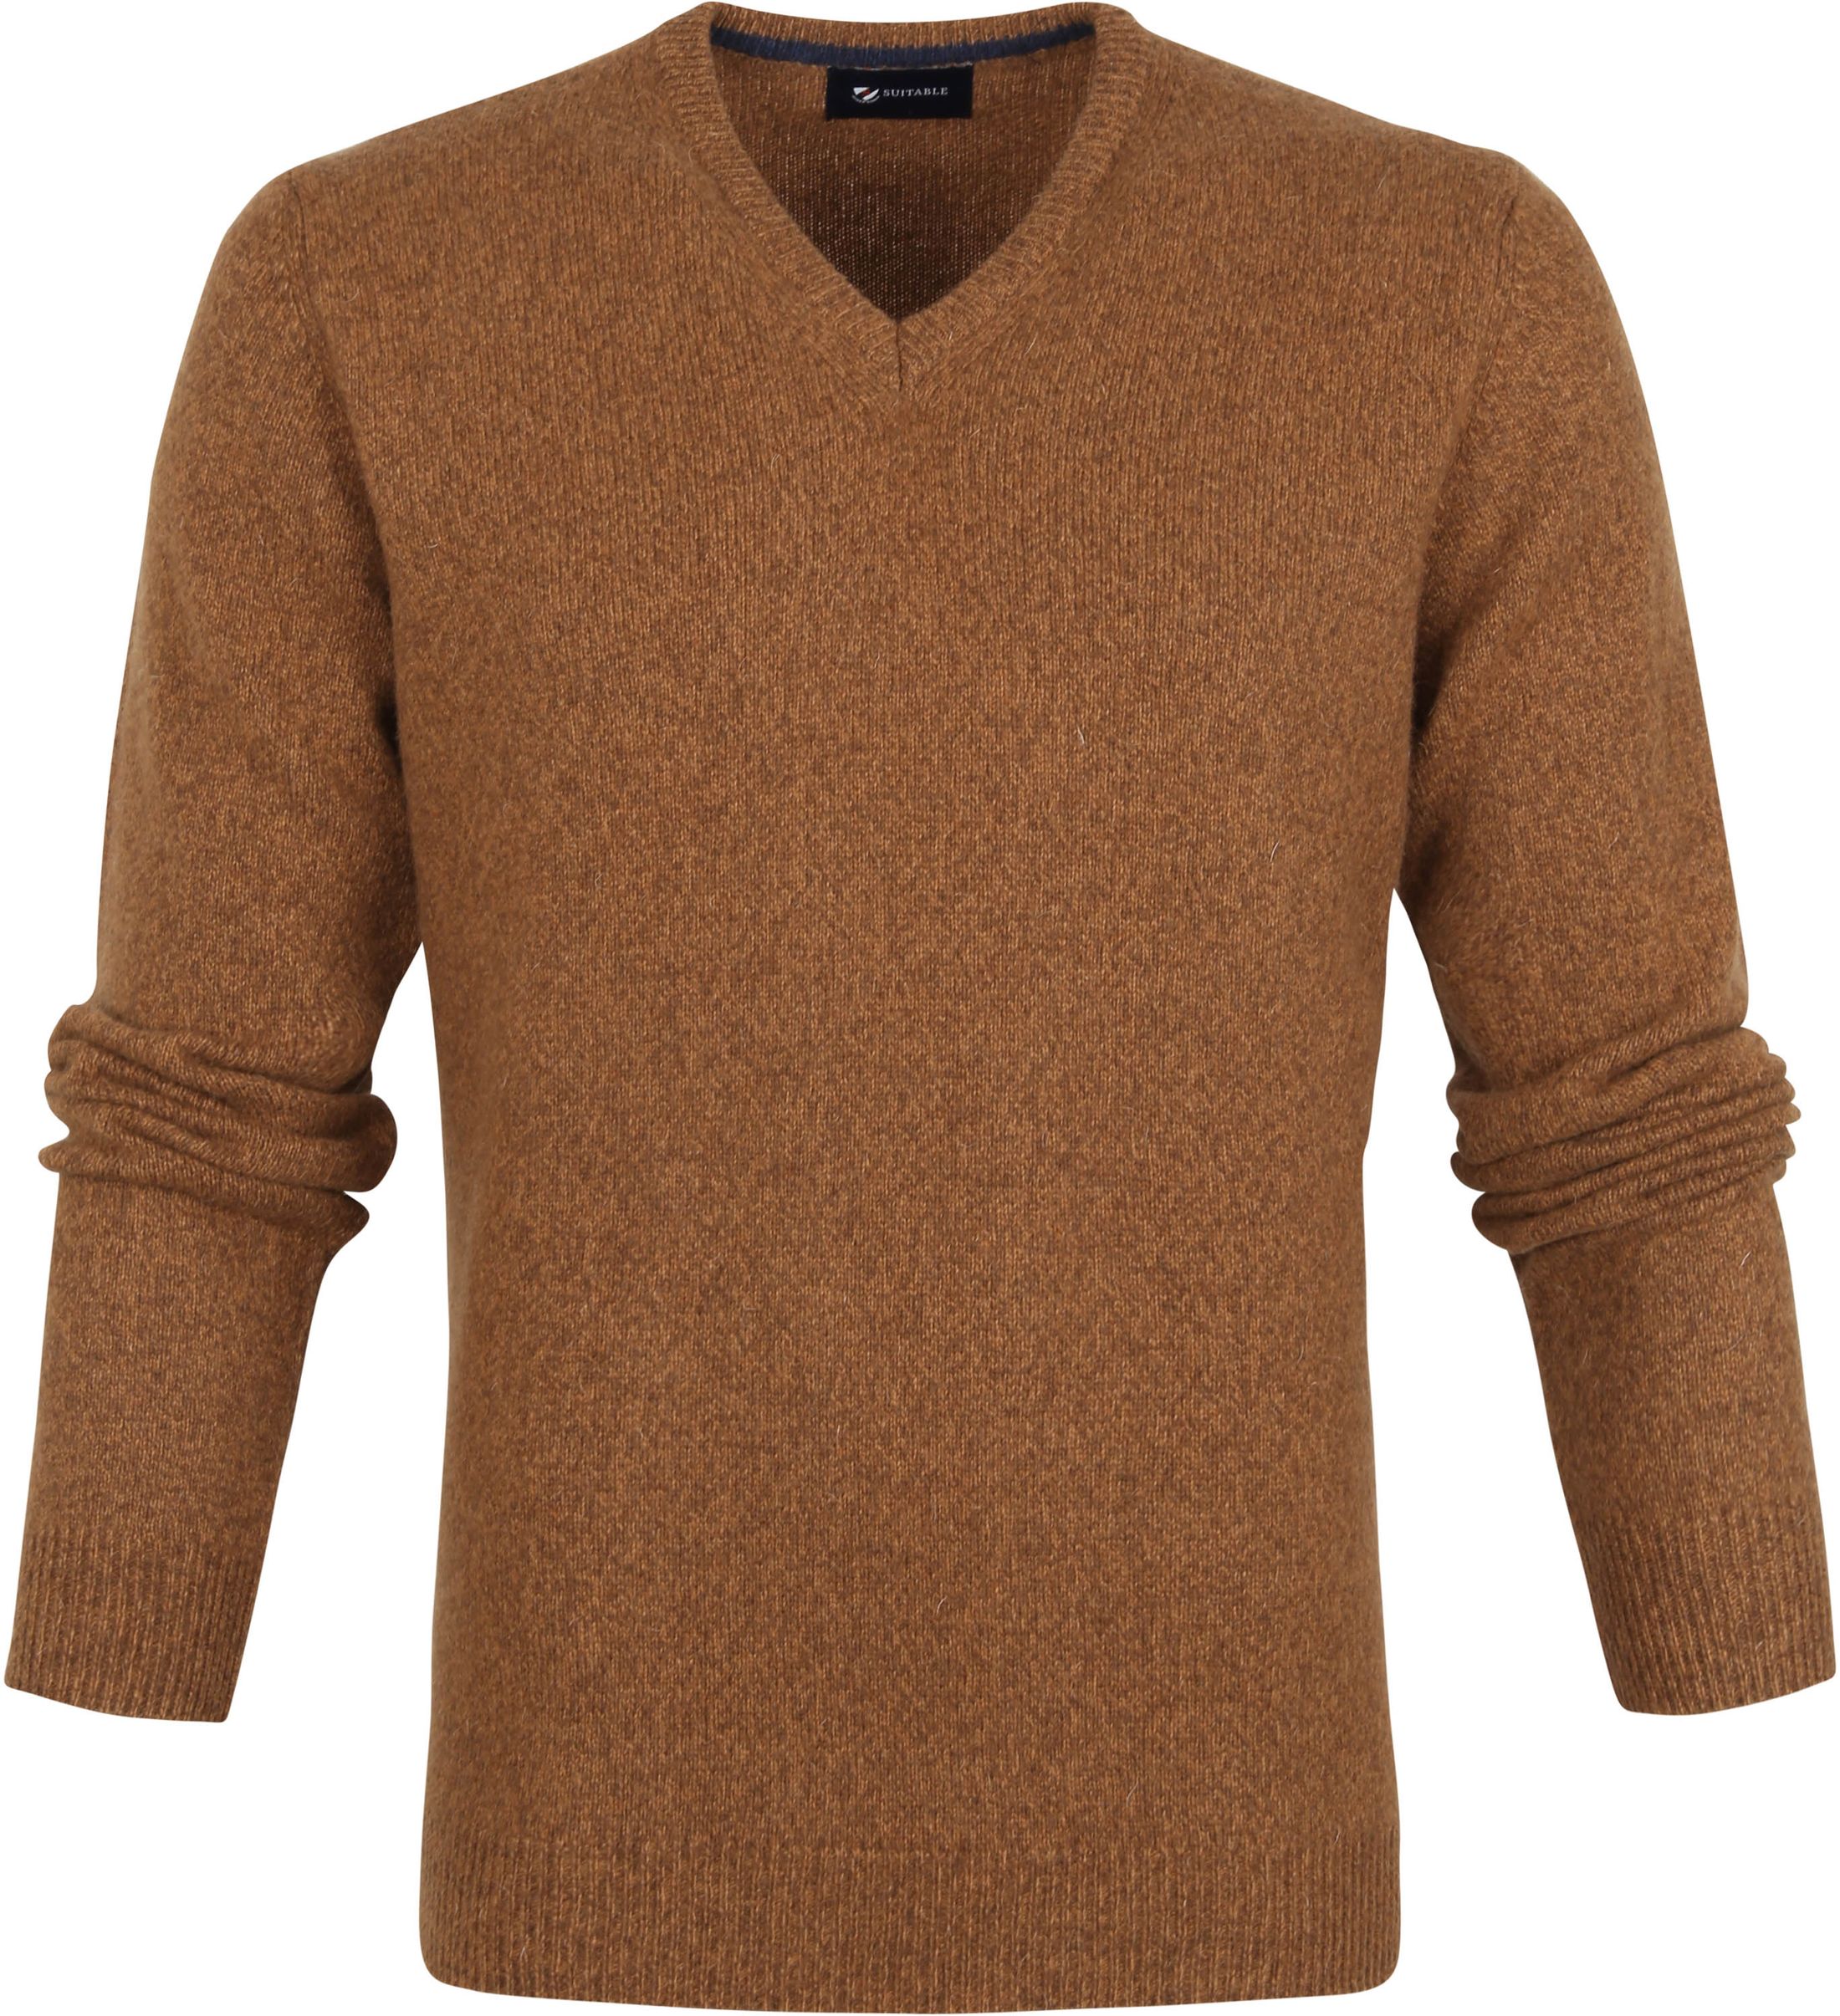 Suitable Lambswool Pullover V-Neck Camel Brown size XL